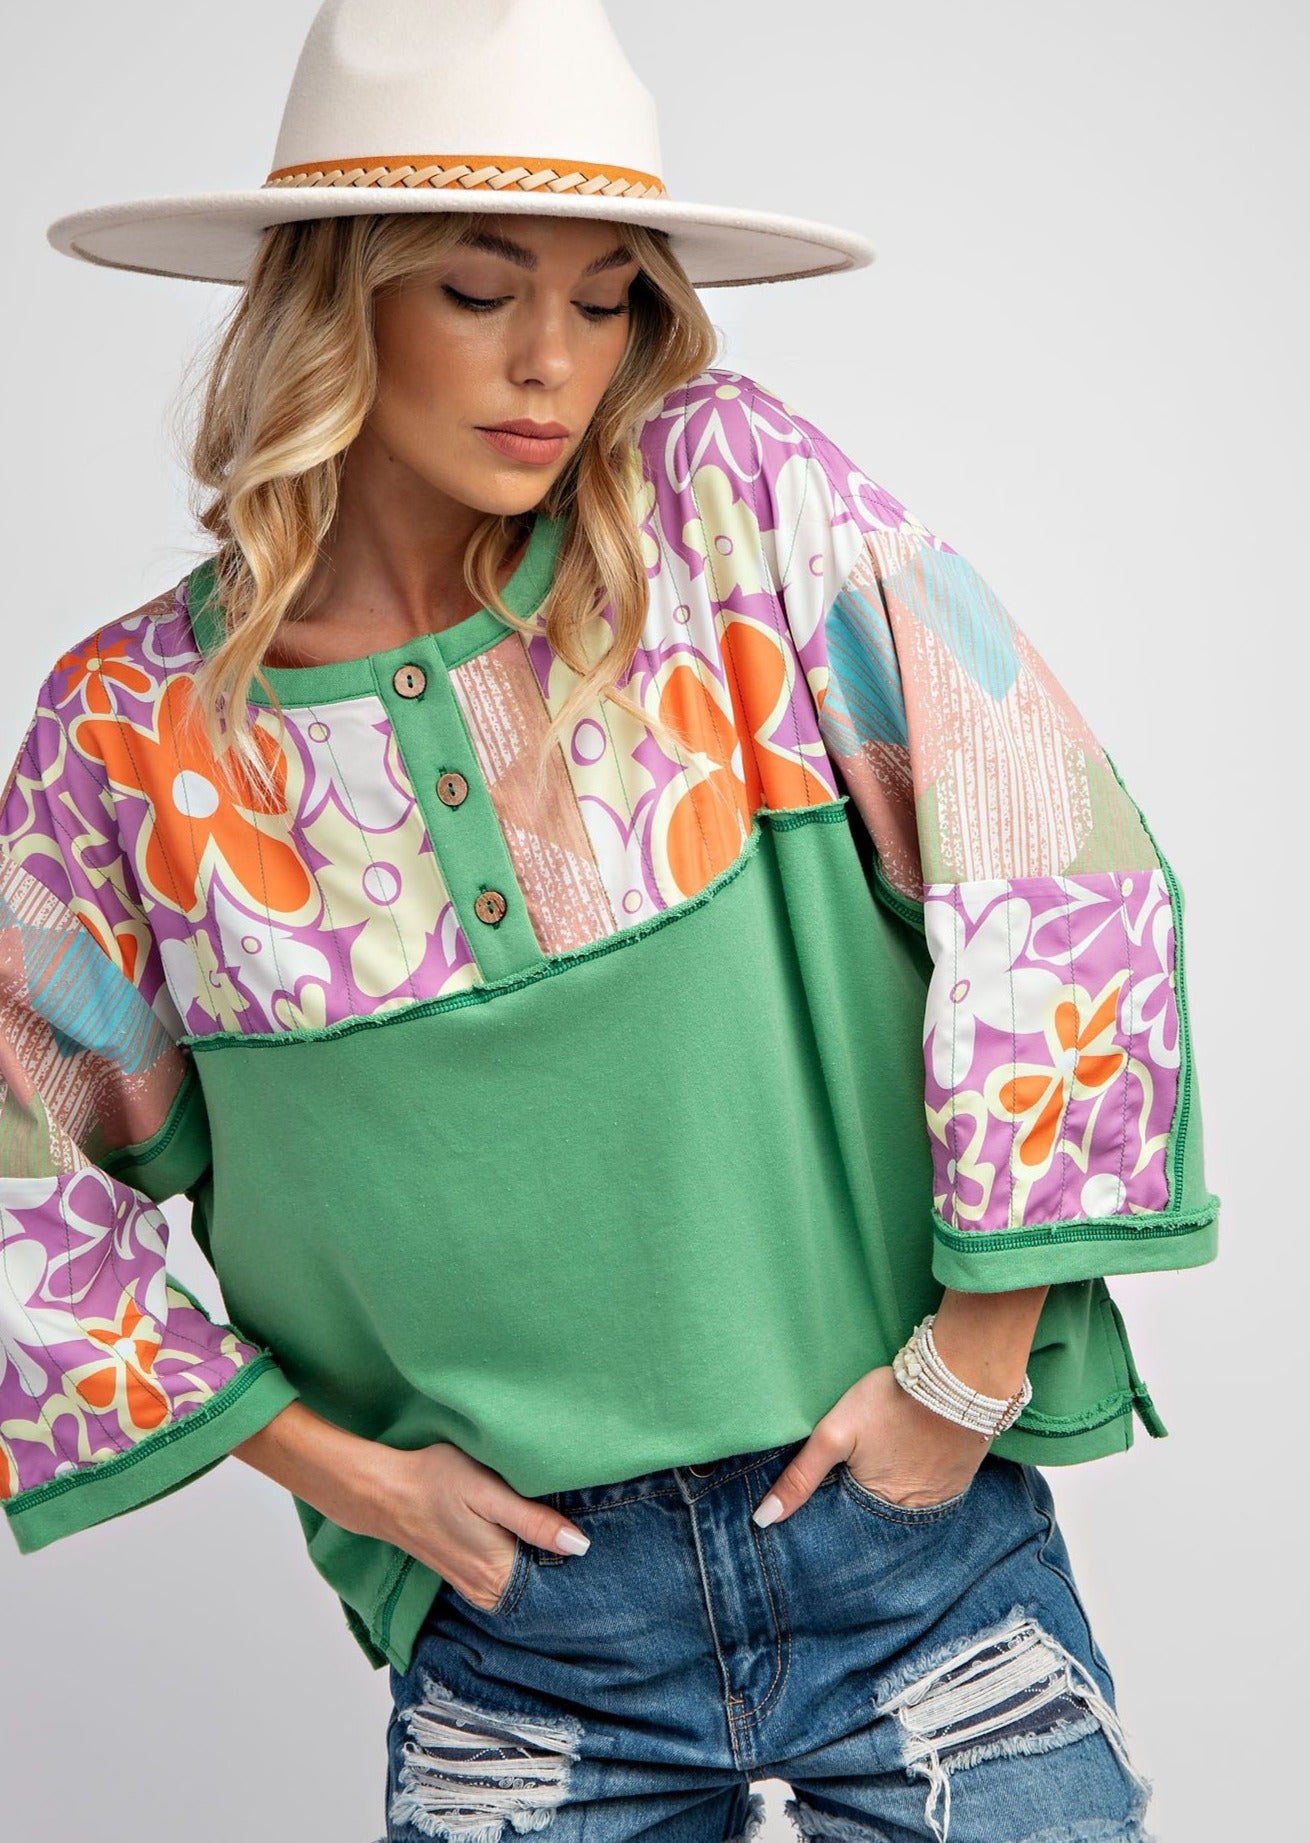 Flower Power Terry Knit Henley Top by Easel - Apple Green - Plus-Apparel-Easel-LouisGeorge Boutique, Women’s Fashion Boutique Located in Trussville, Alabama